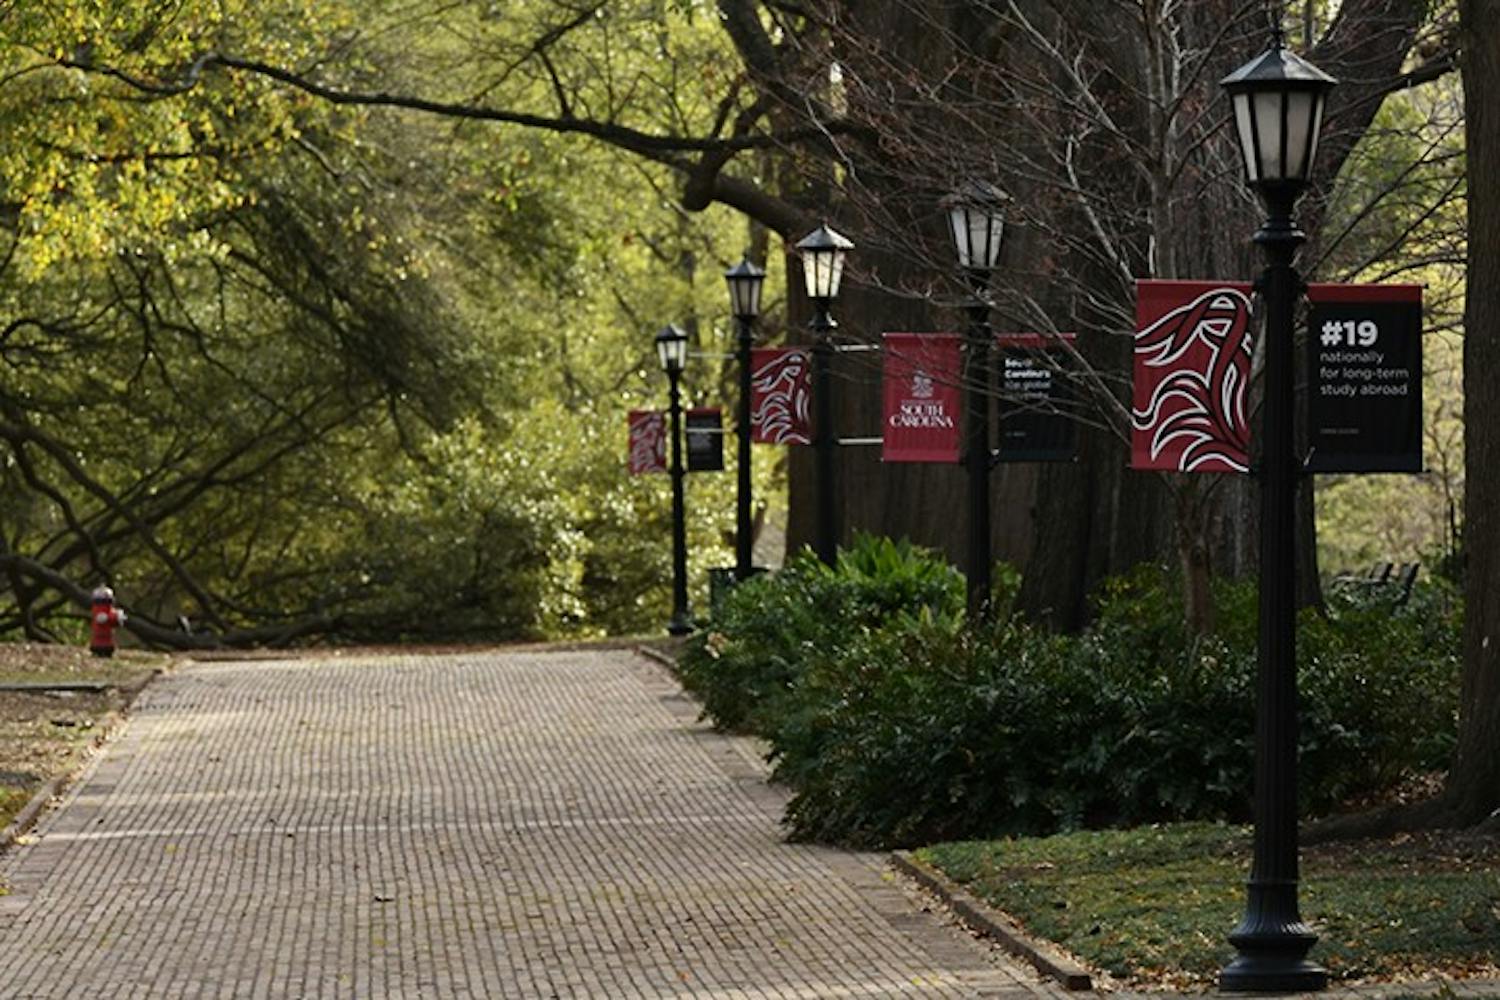 &nbsp;Lightposts line the edge of the Horseshoe with USC flags hanging on either side.&nbsp;